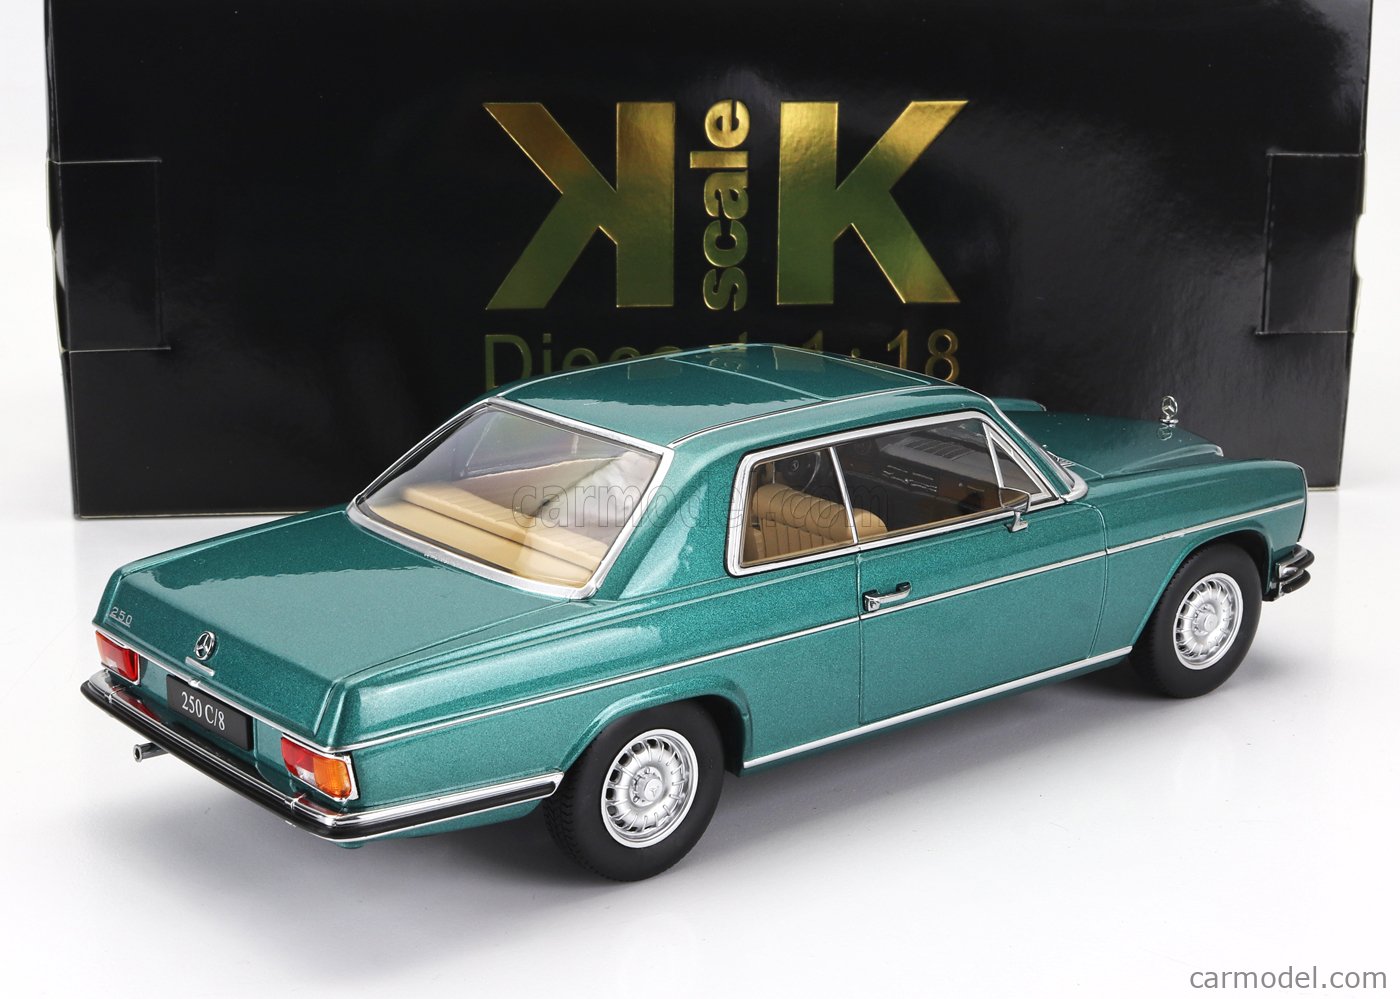 MERCEDES BENZ - 280C/8 (W114) COUPE 1969